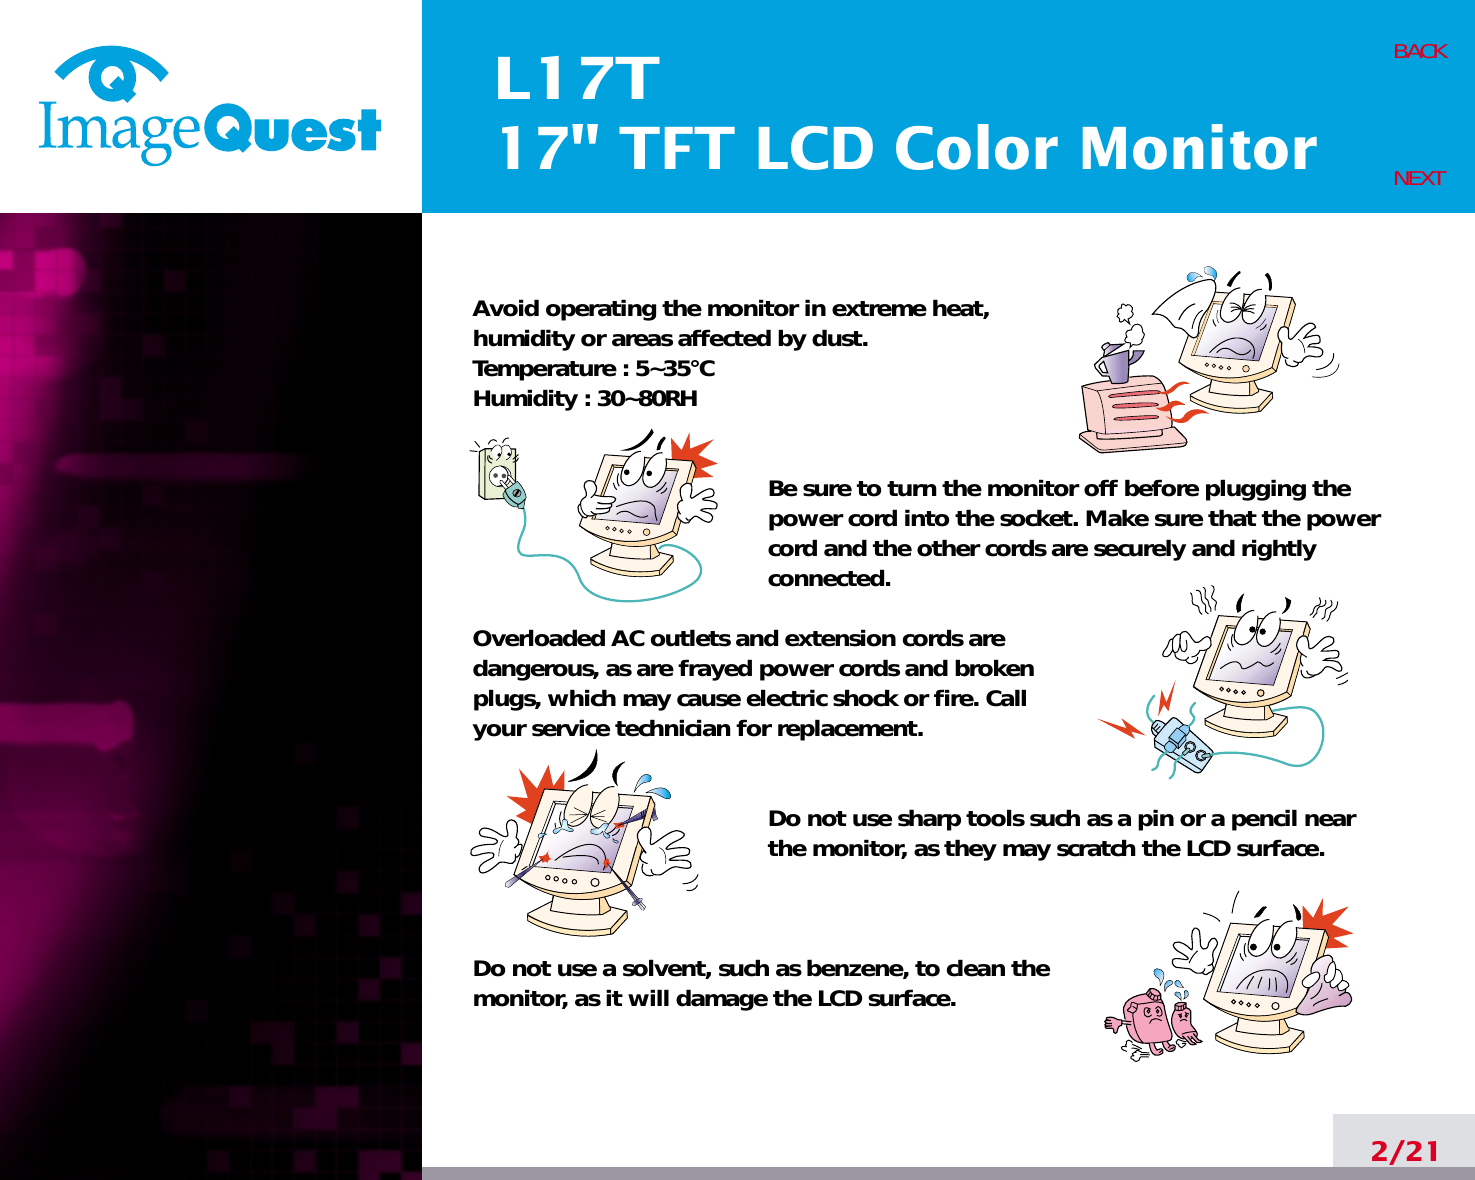 L17T17&quot; TFT LCD Color Monitor2/21BACKNEXTAvoid operating the monitor in extreme heat, humidity or areas affected by dust. Temperature : 5~35°CHumidity : 30~80RH Be sure to turn the monitor off before plugging thepower cord into the socket. Make sure that the powercord and the other cords are securely and rightlyconnected.Overloaded AC outlets and extension cords are dangerous, as are frayed power cords and broken plugs, which may cause electric shock or fire. Call your service technician for replacement.Do not use sharp tools such as a pin or a pencil near the monitor, as they may scratch the LCD surface.Do not use a solvent, such as benzene, to clean the monitor, as it will damage the LCD surface.